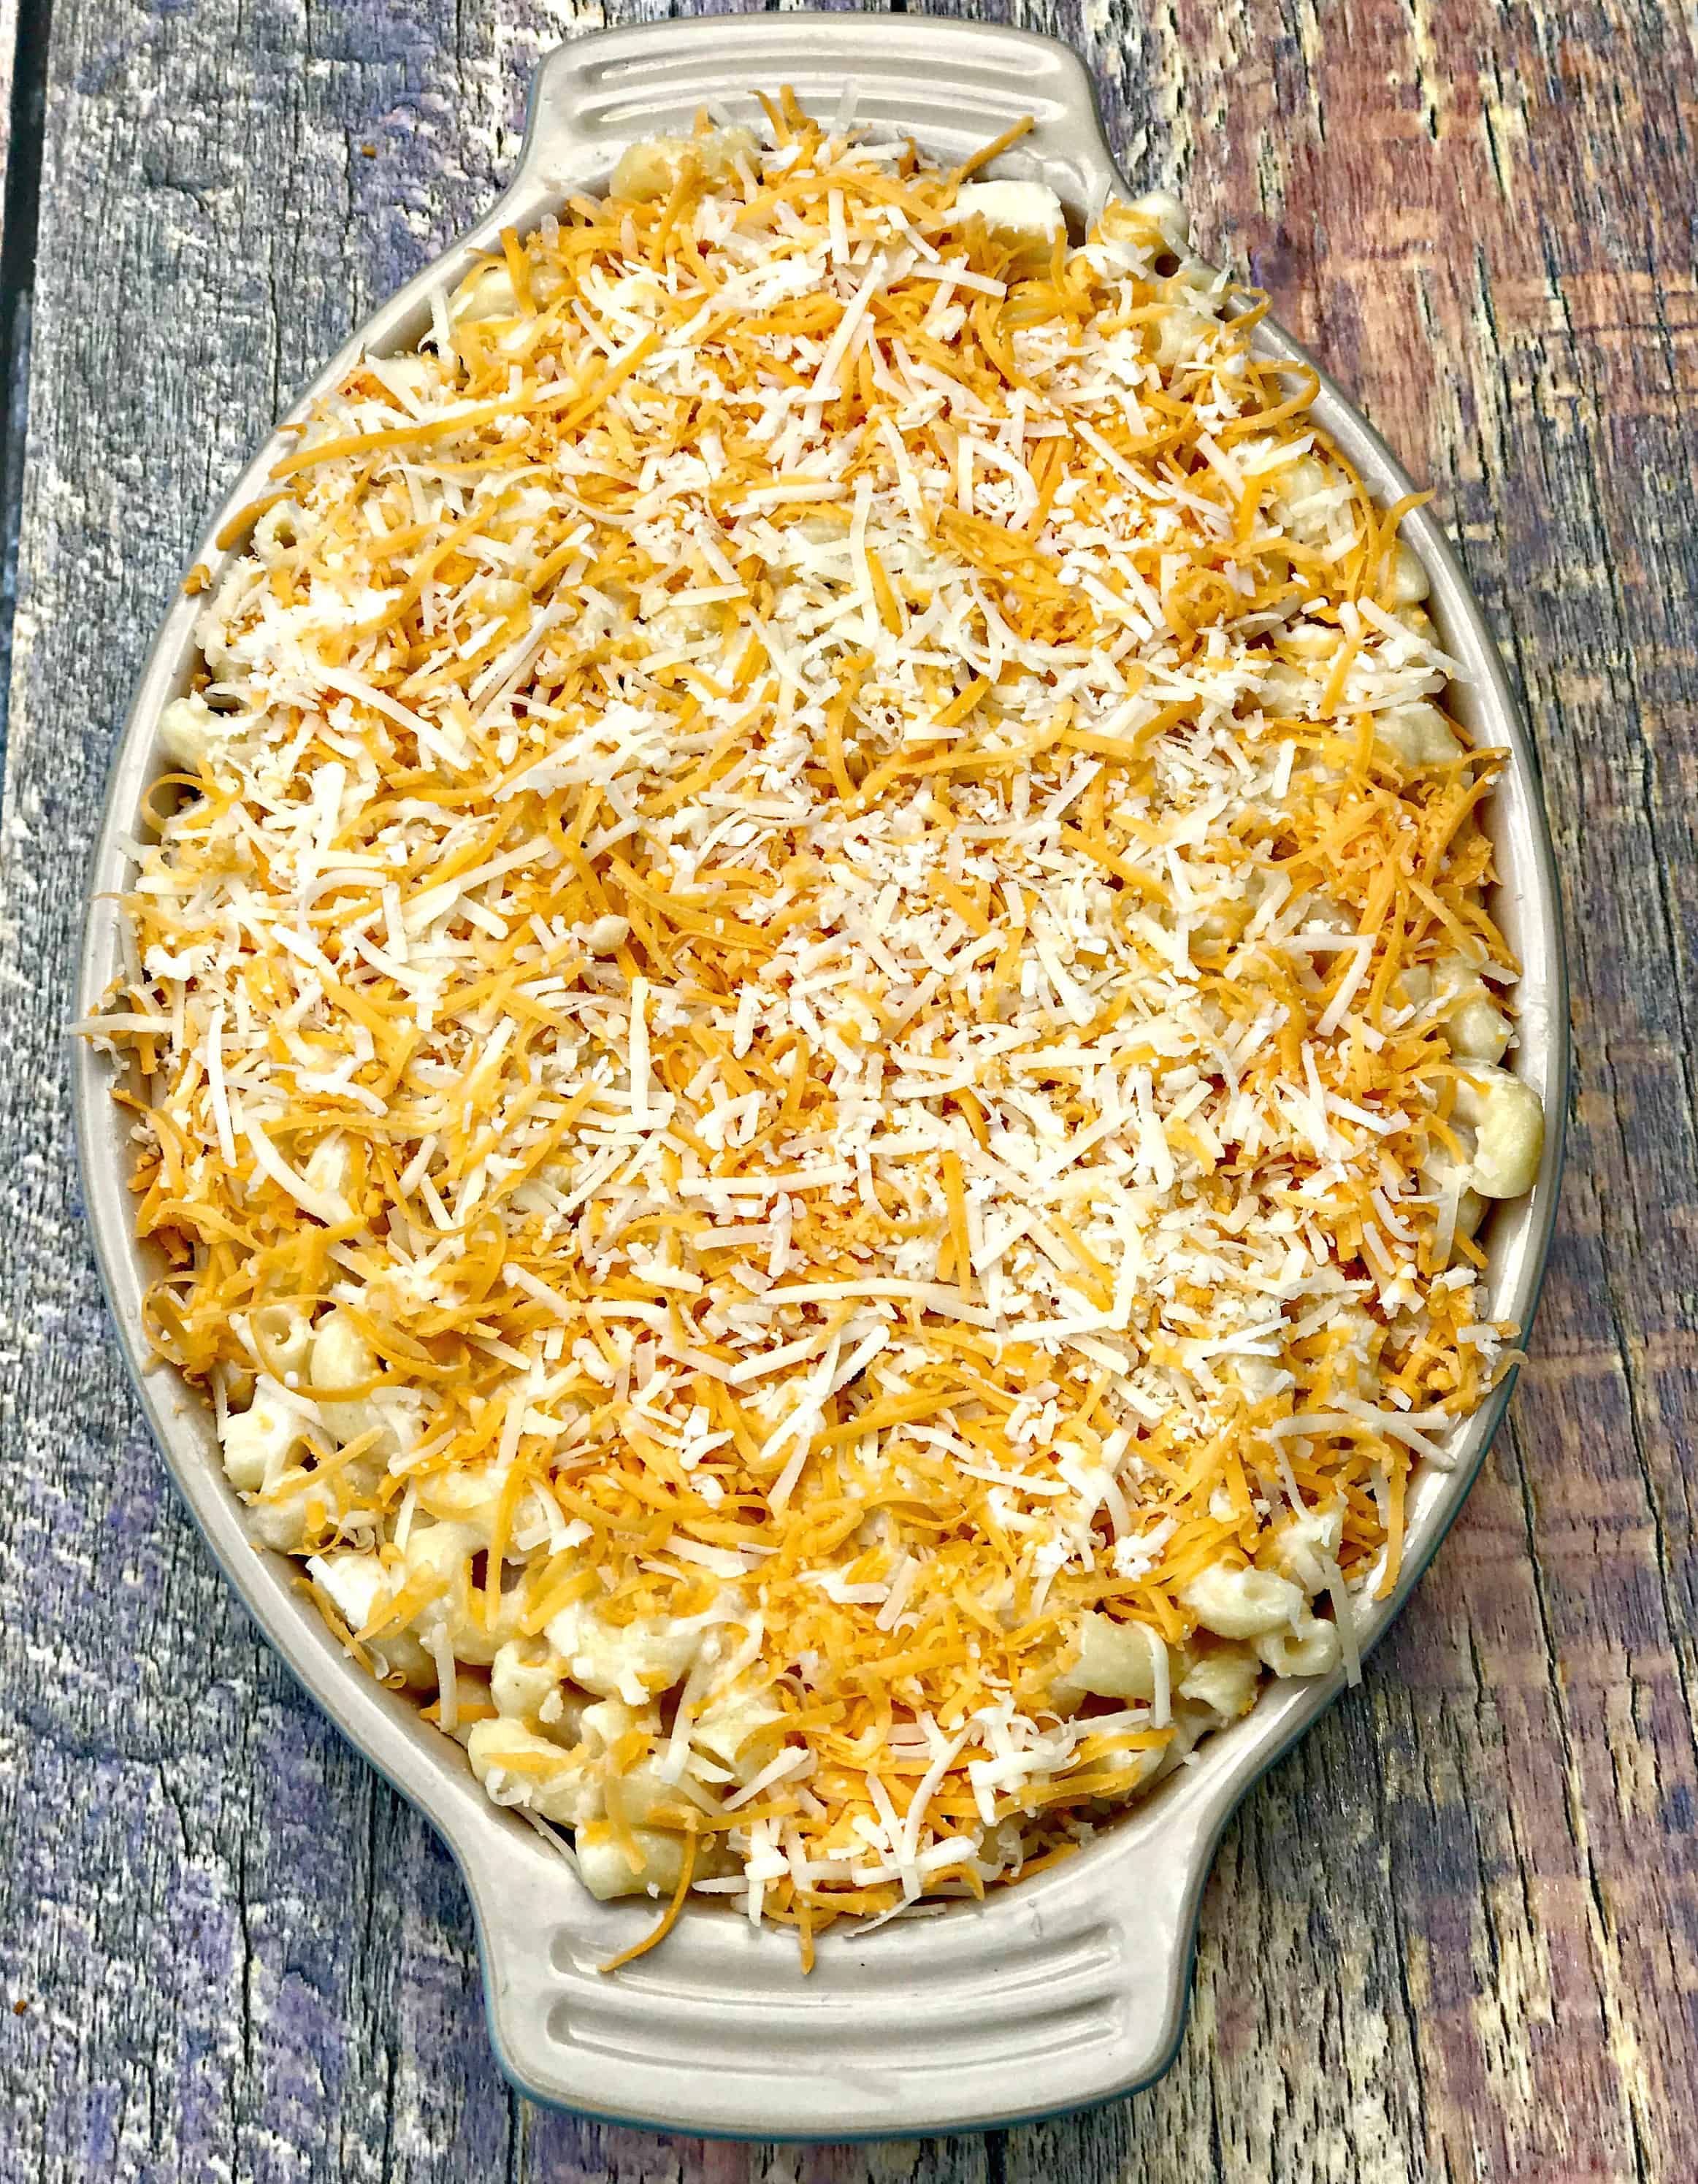 southern style baked macaroni and cheese - Stay Snatched